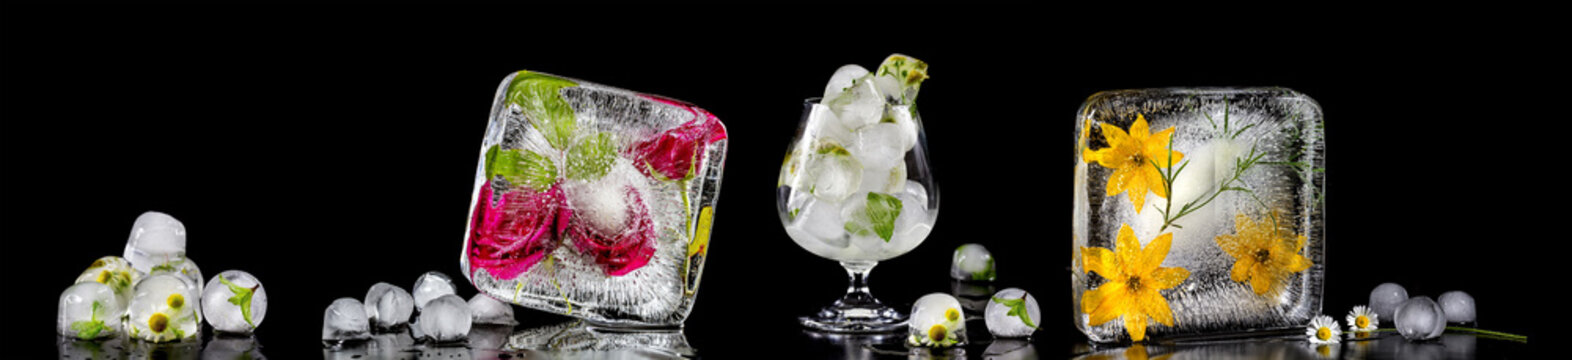 Panoramic image with flowers frozen in ice cubes. Isolate on bla